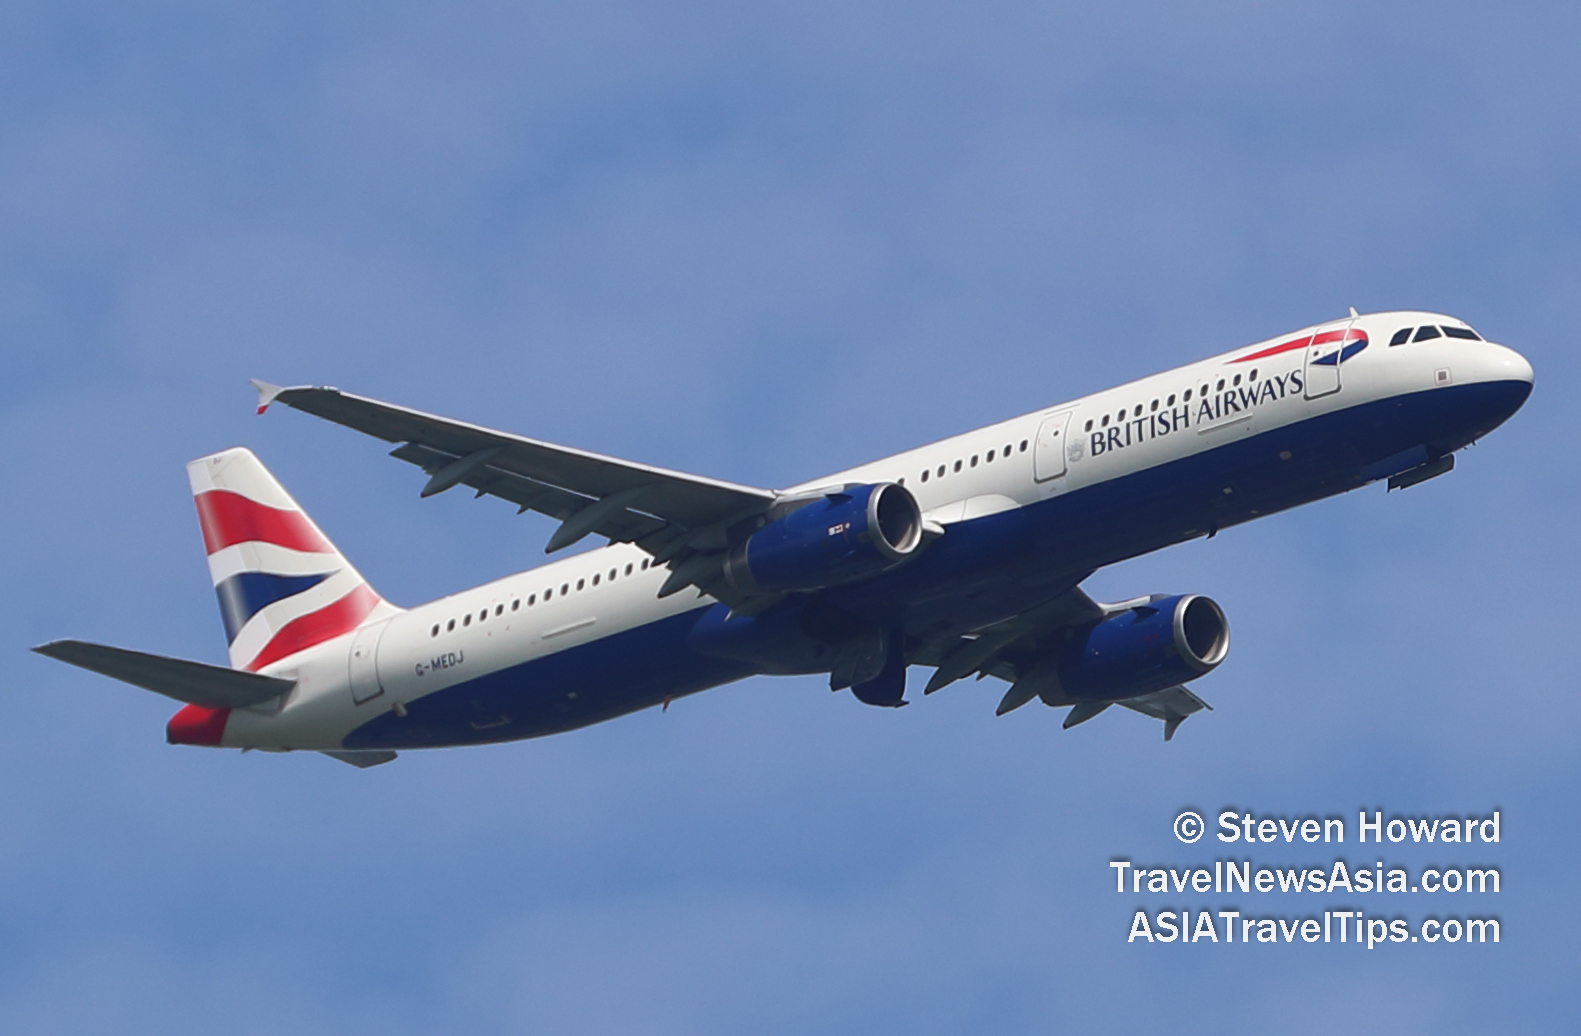 British Airways Airbus A321 reg: G-MEDJ. Picture by Steven Howard of TravelNewsAsia.com Click to enlarge.